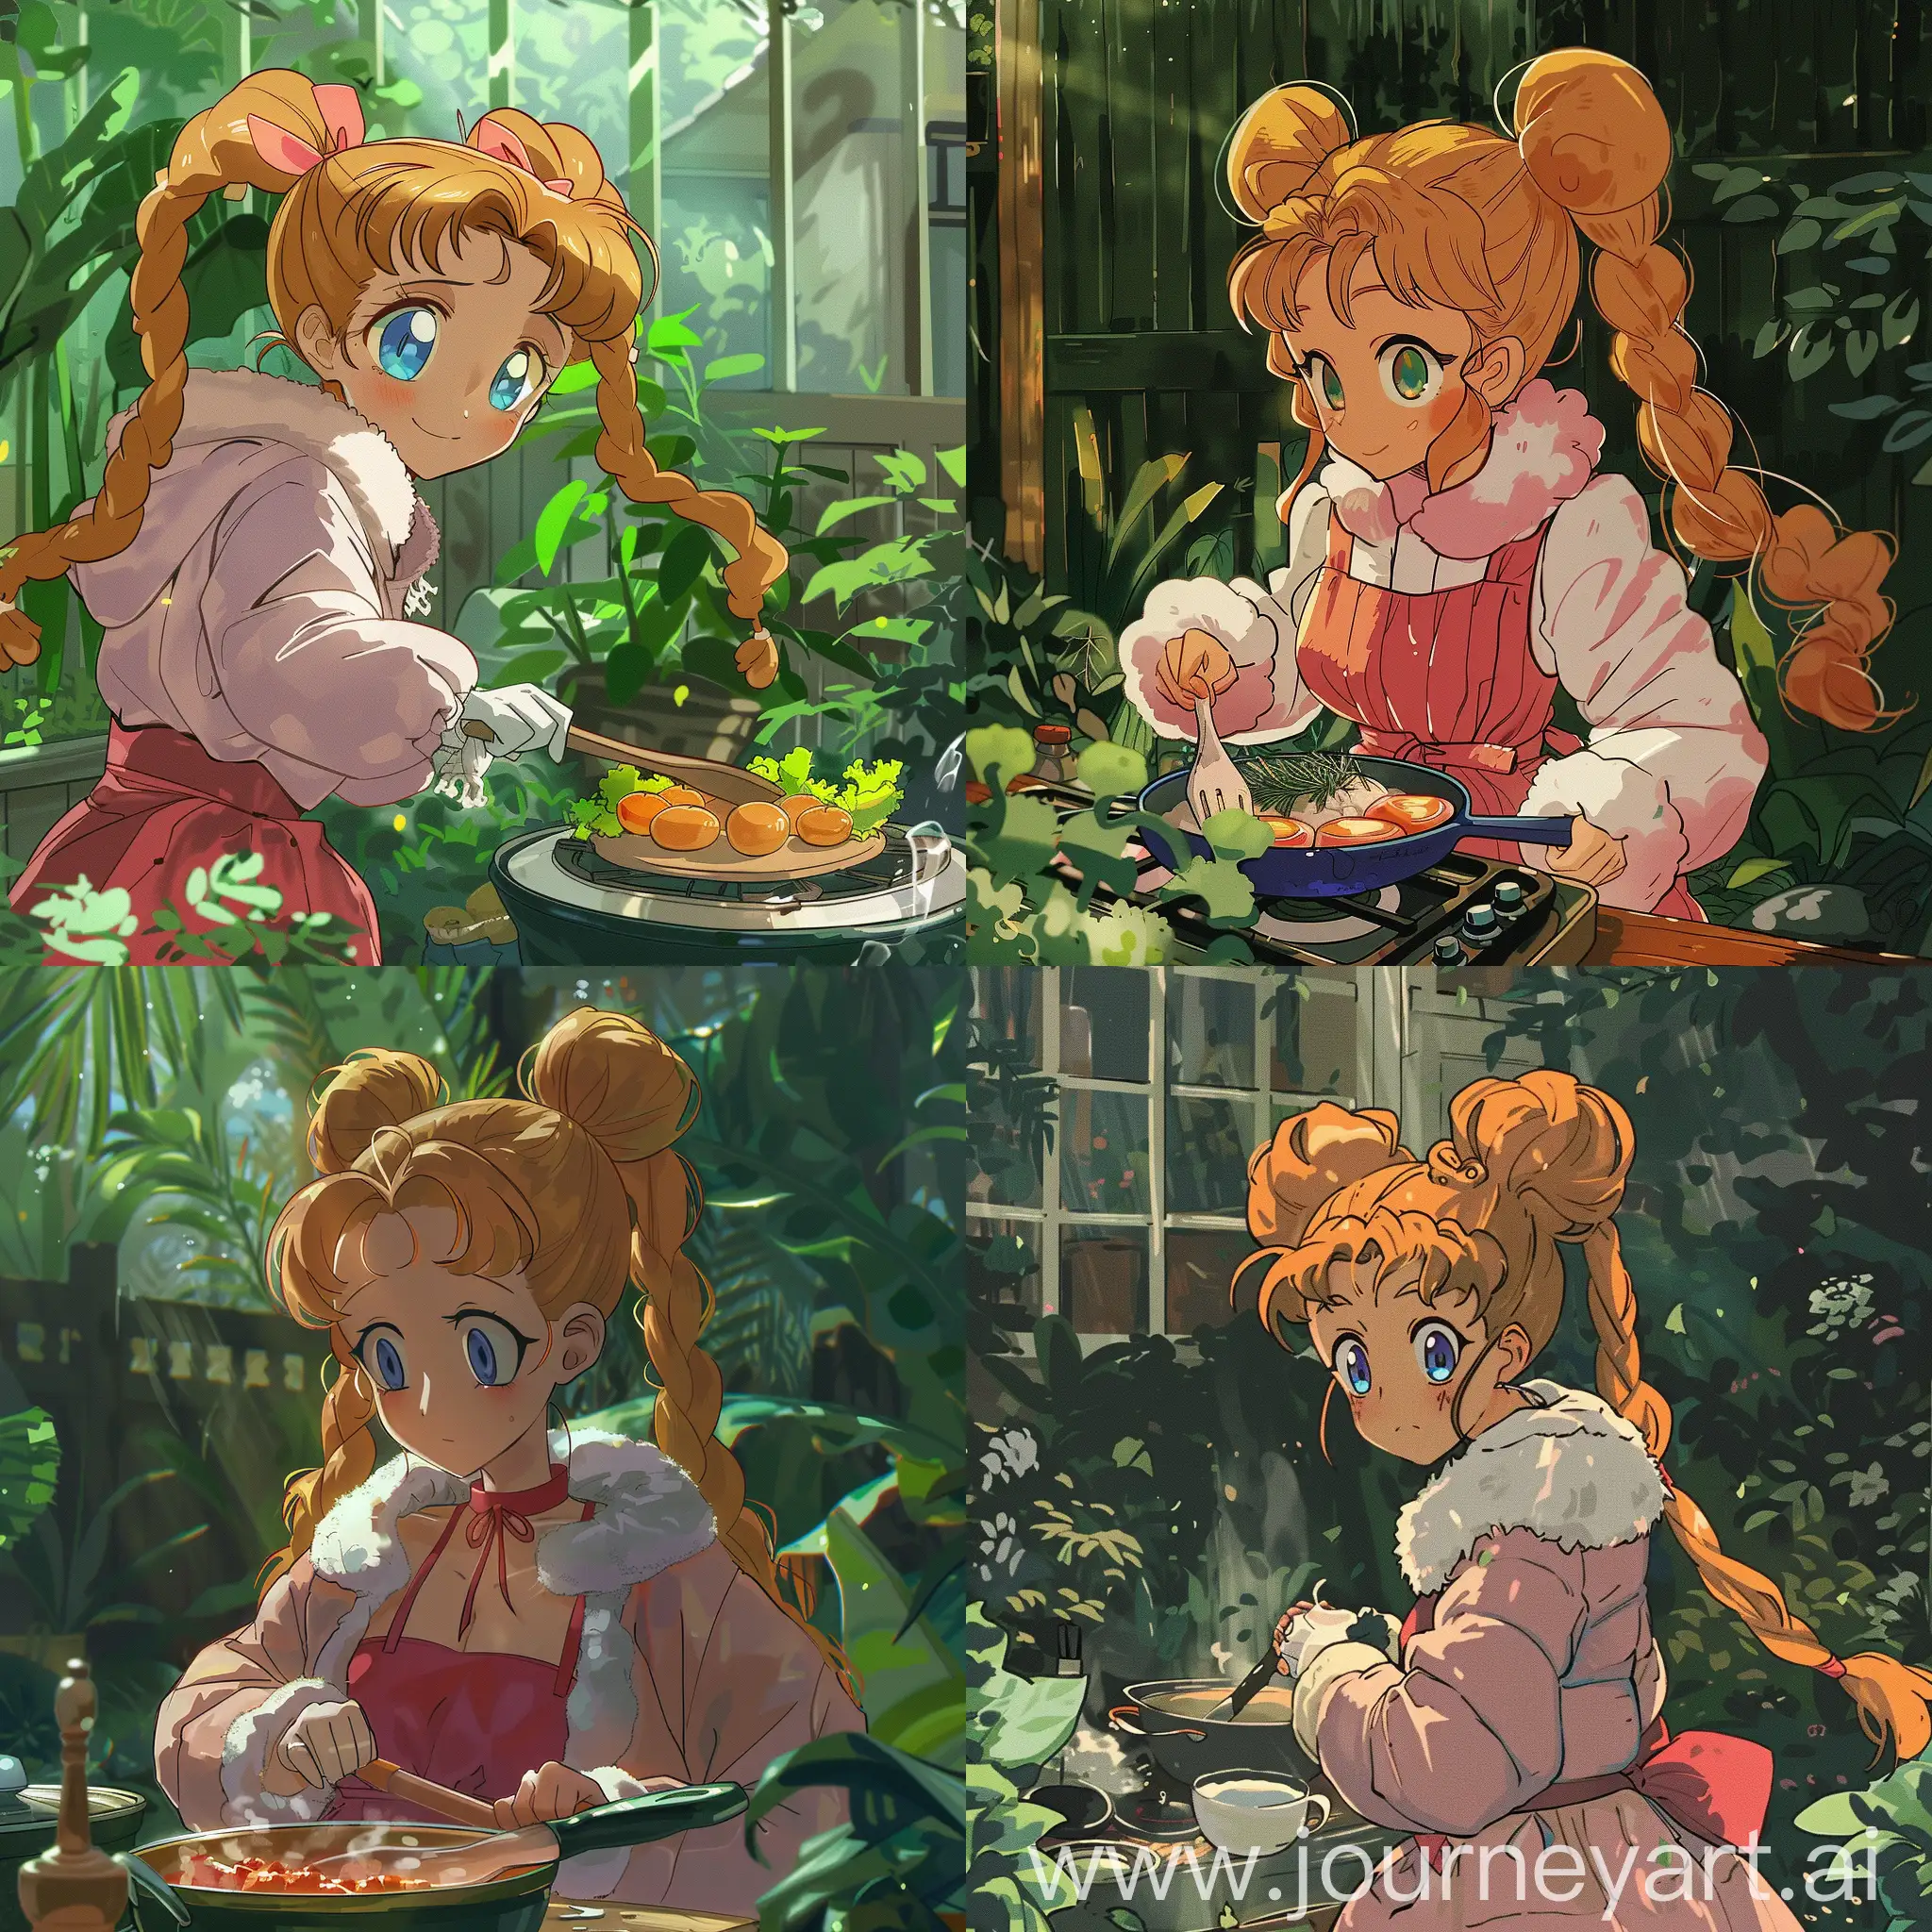 Anime-Style-Woman-in-Red-Dress-Cooking-in-Garden